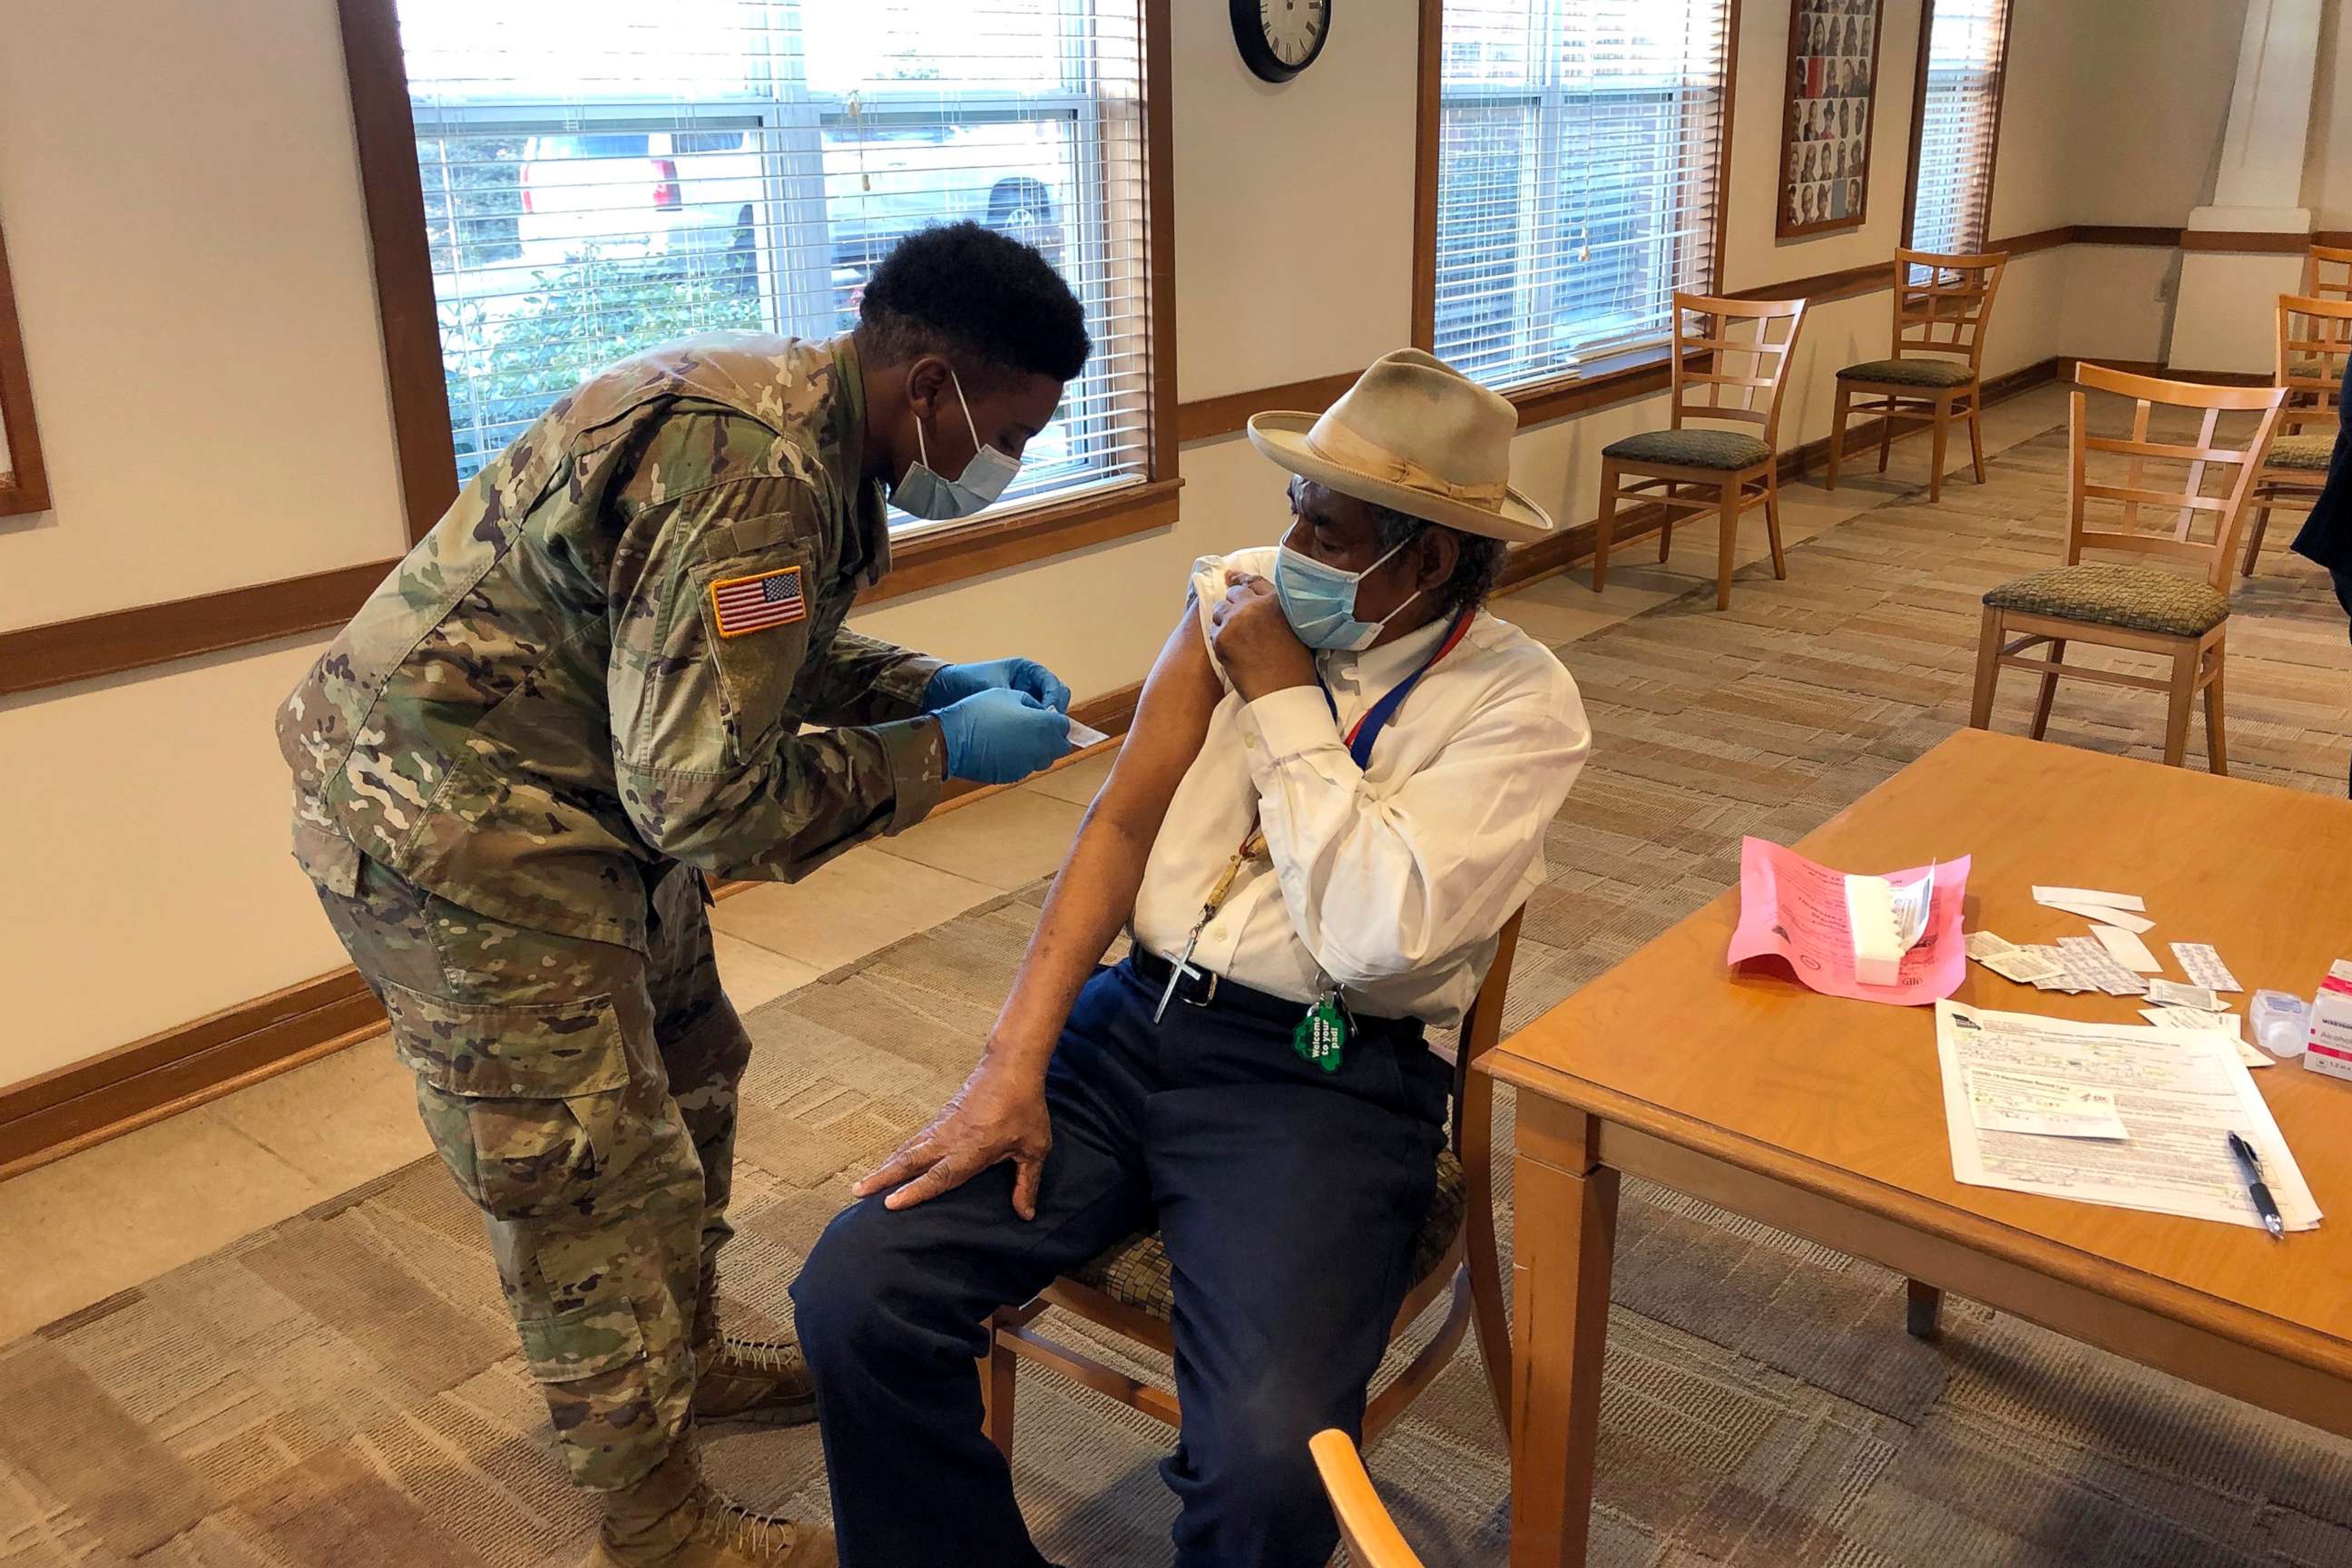 PHOTO: The Rev. Oliver Savage gets a COVID-19 vaccine from Missouri National Guard member Richard Waithira, March 4, 2021, during a vaccination clinic at a St. Louis senior center.